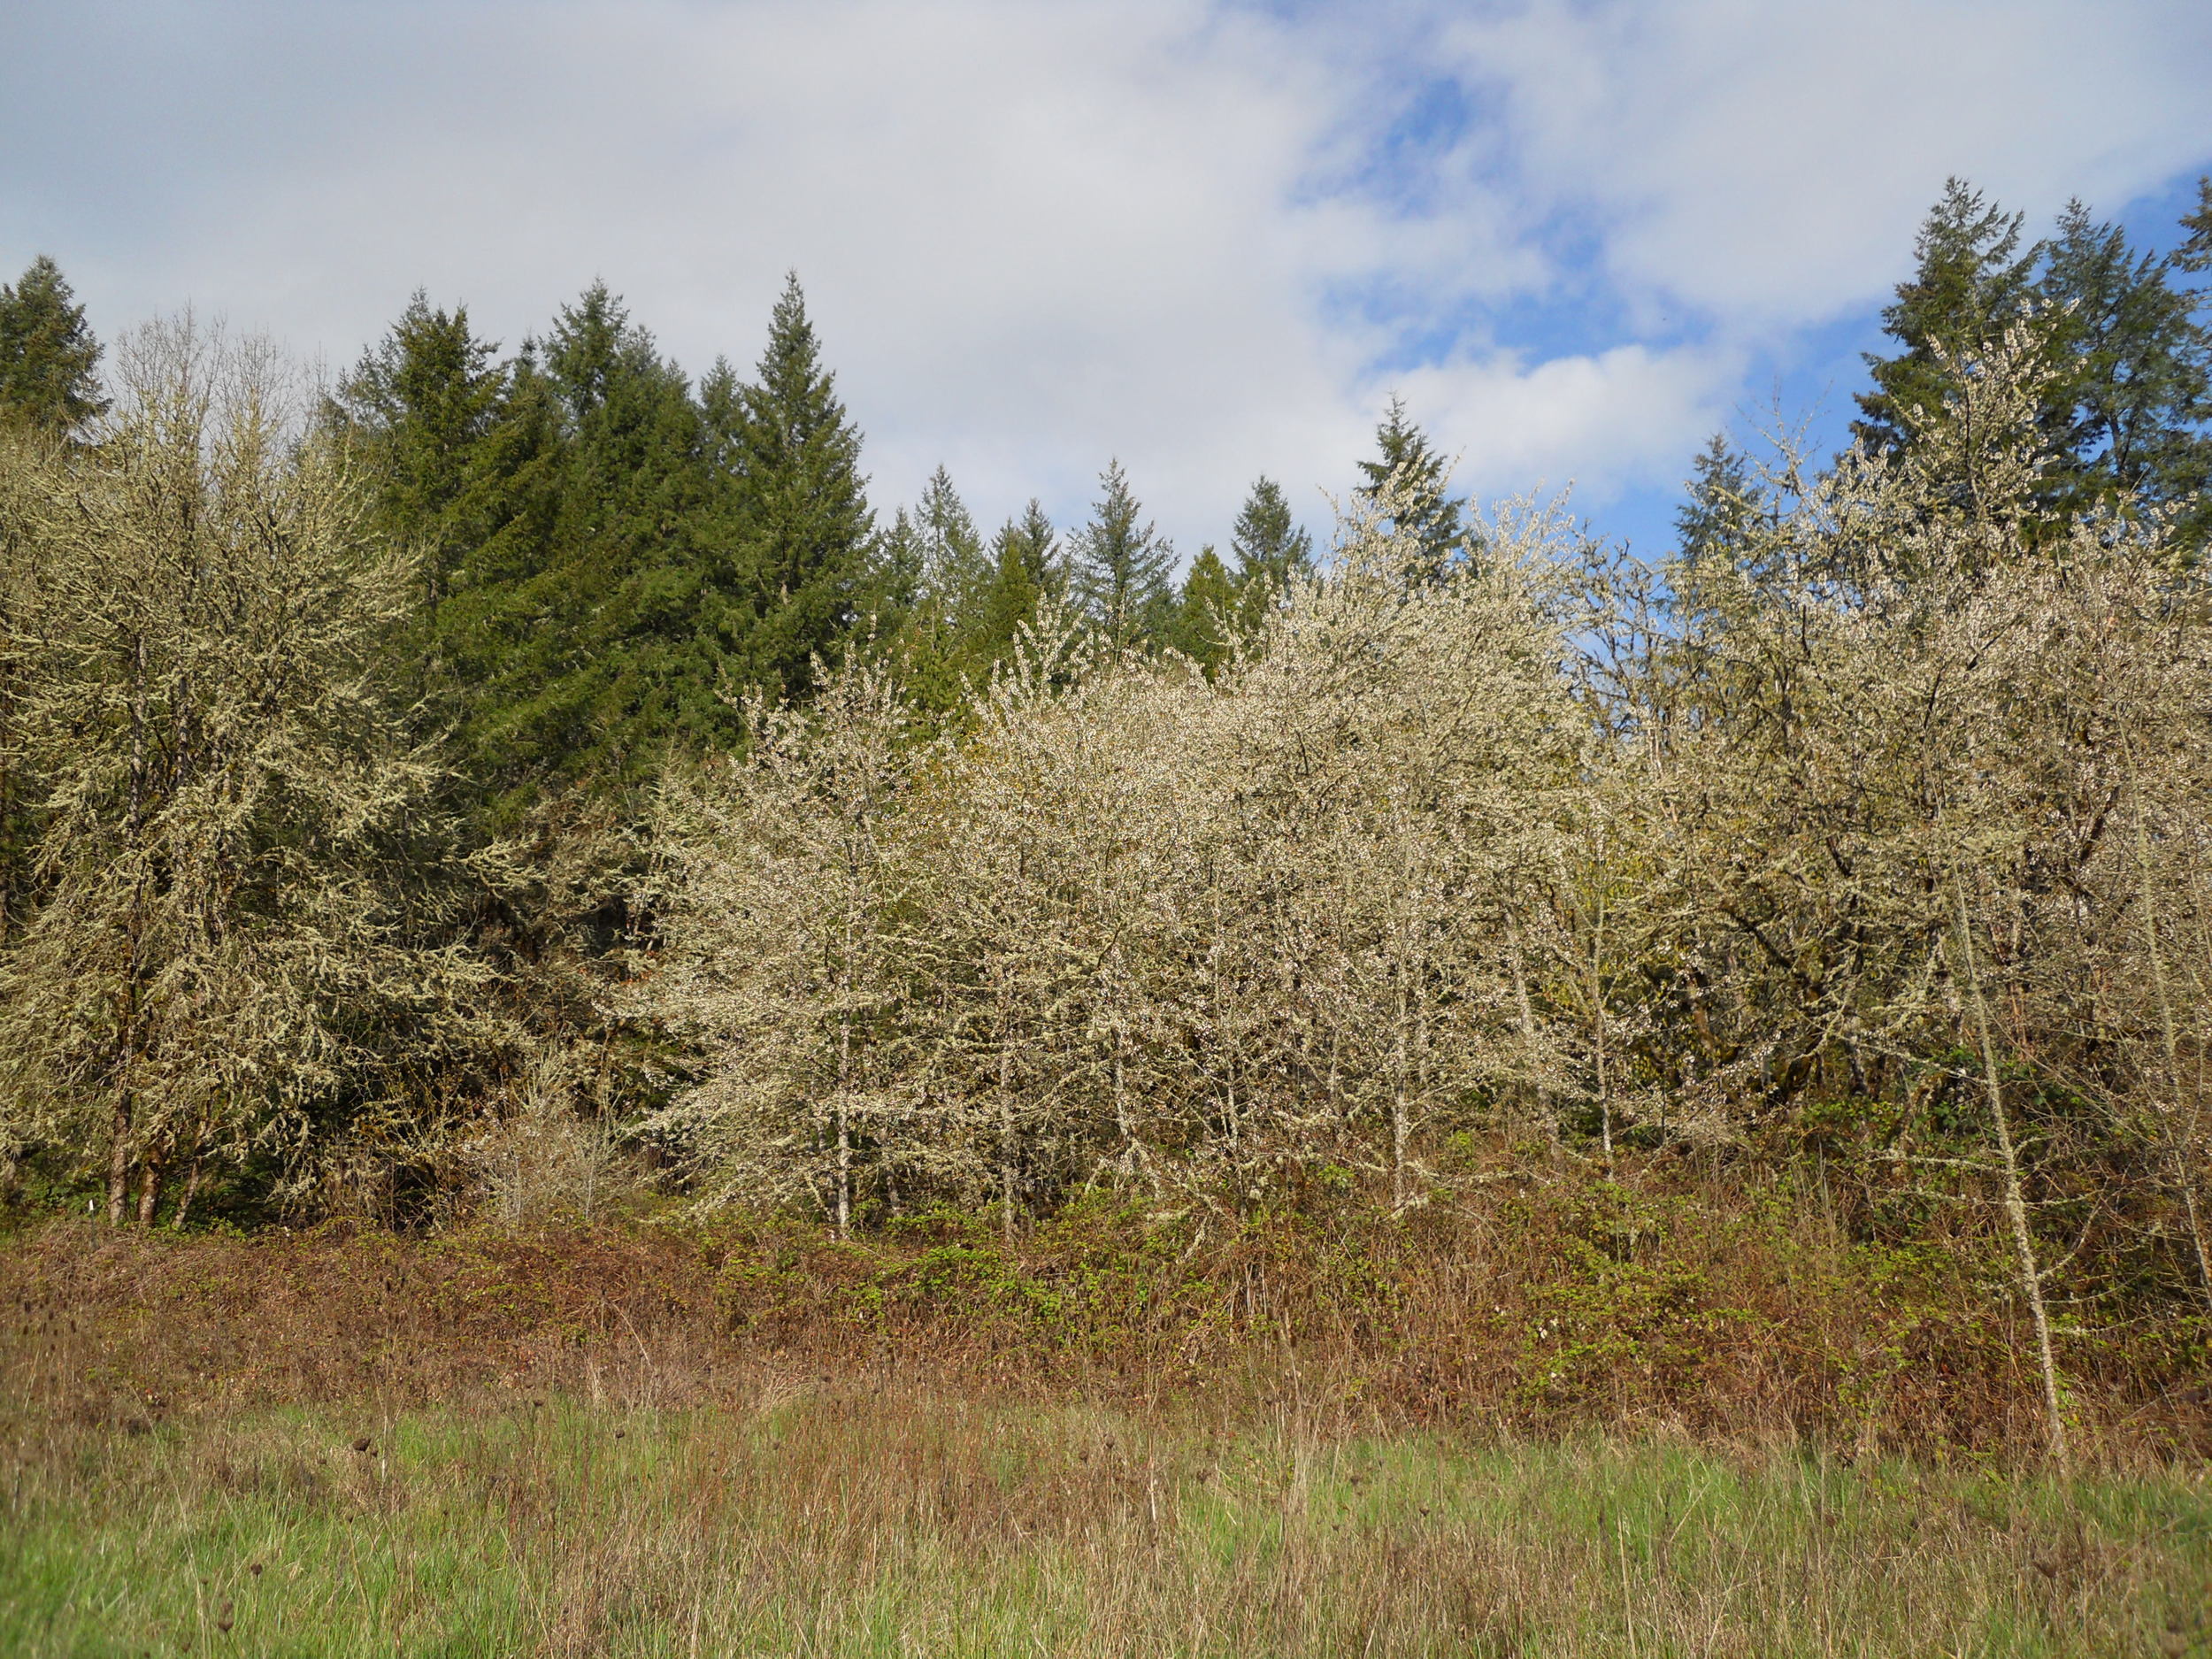  A grove of wild cherry trees at the base of the butte in bloom. 